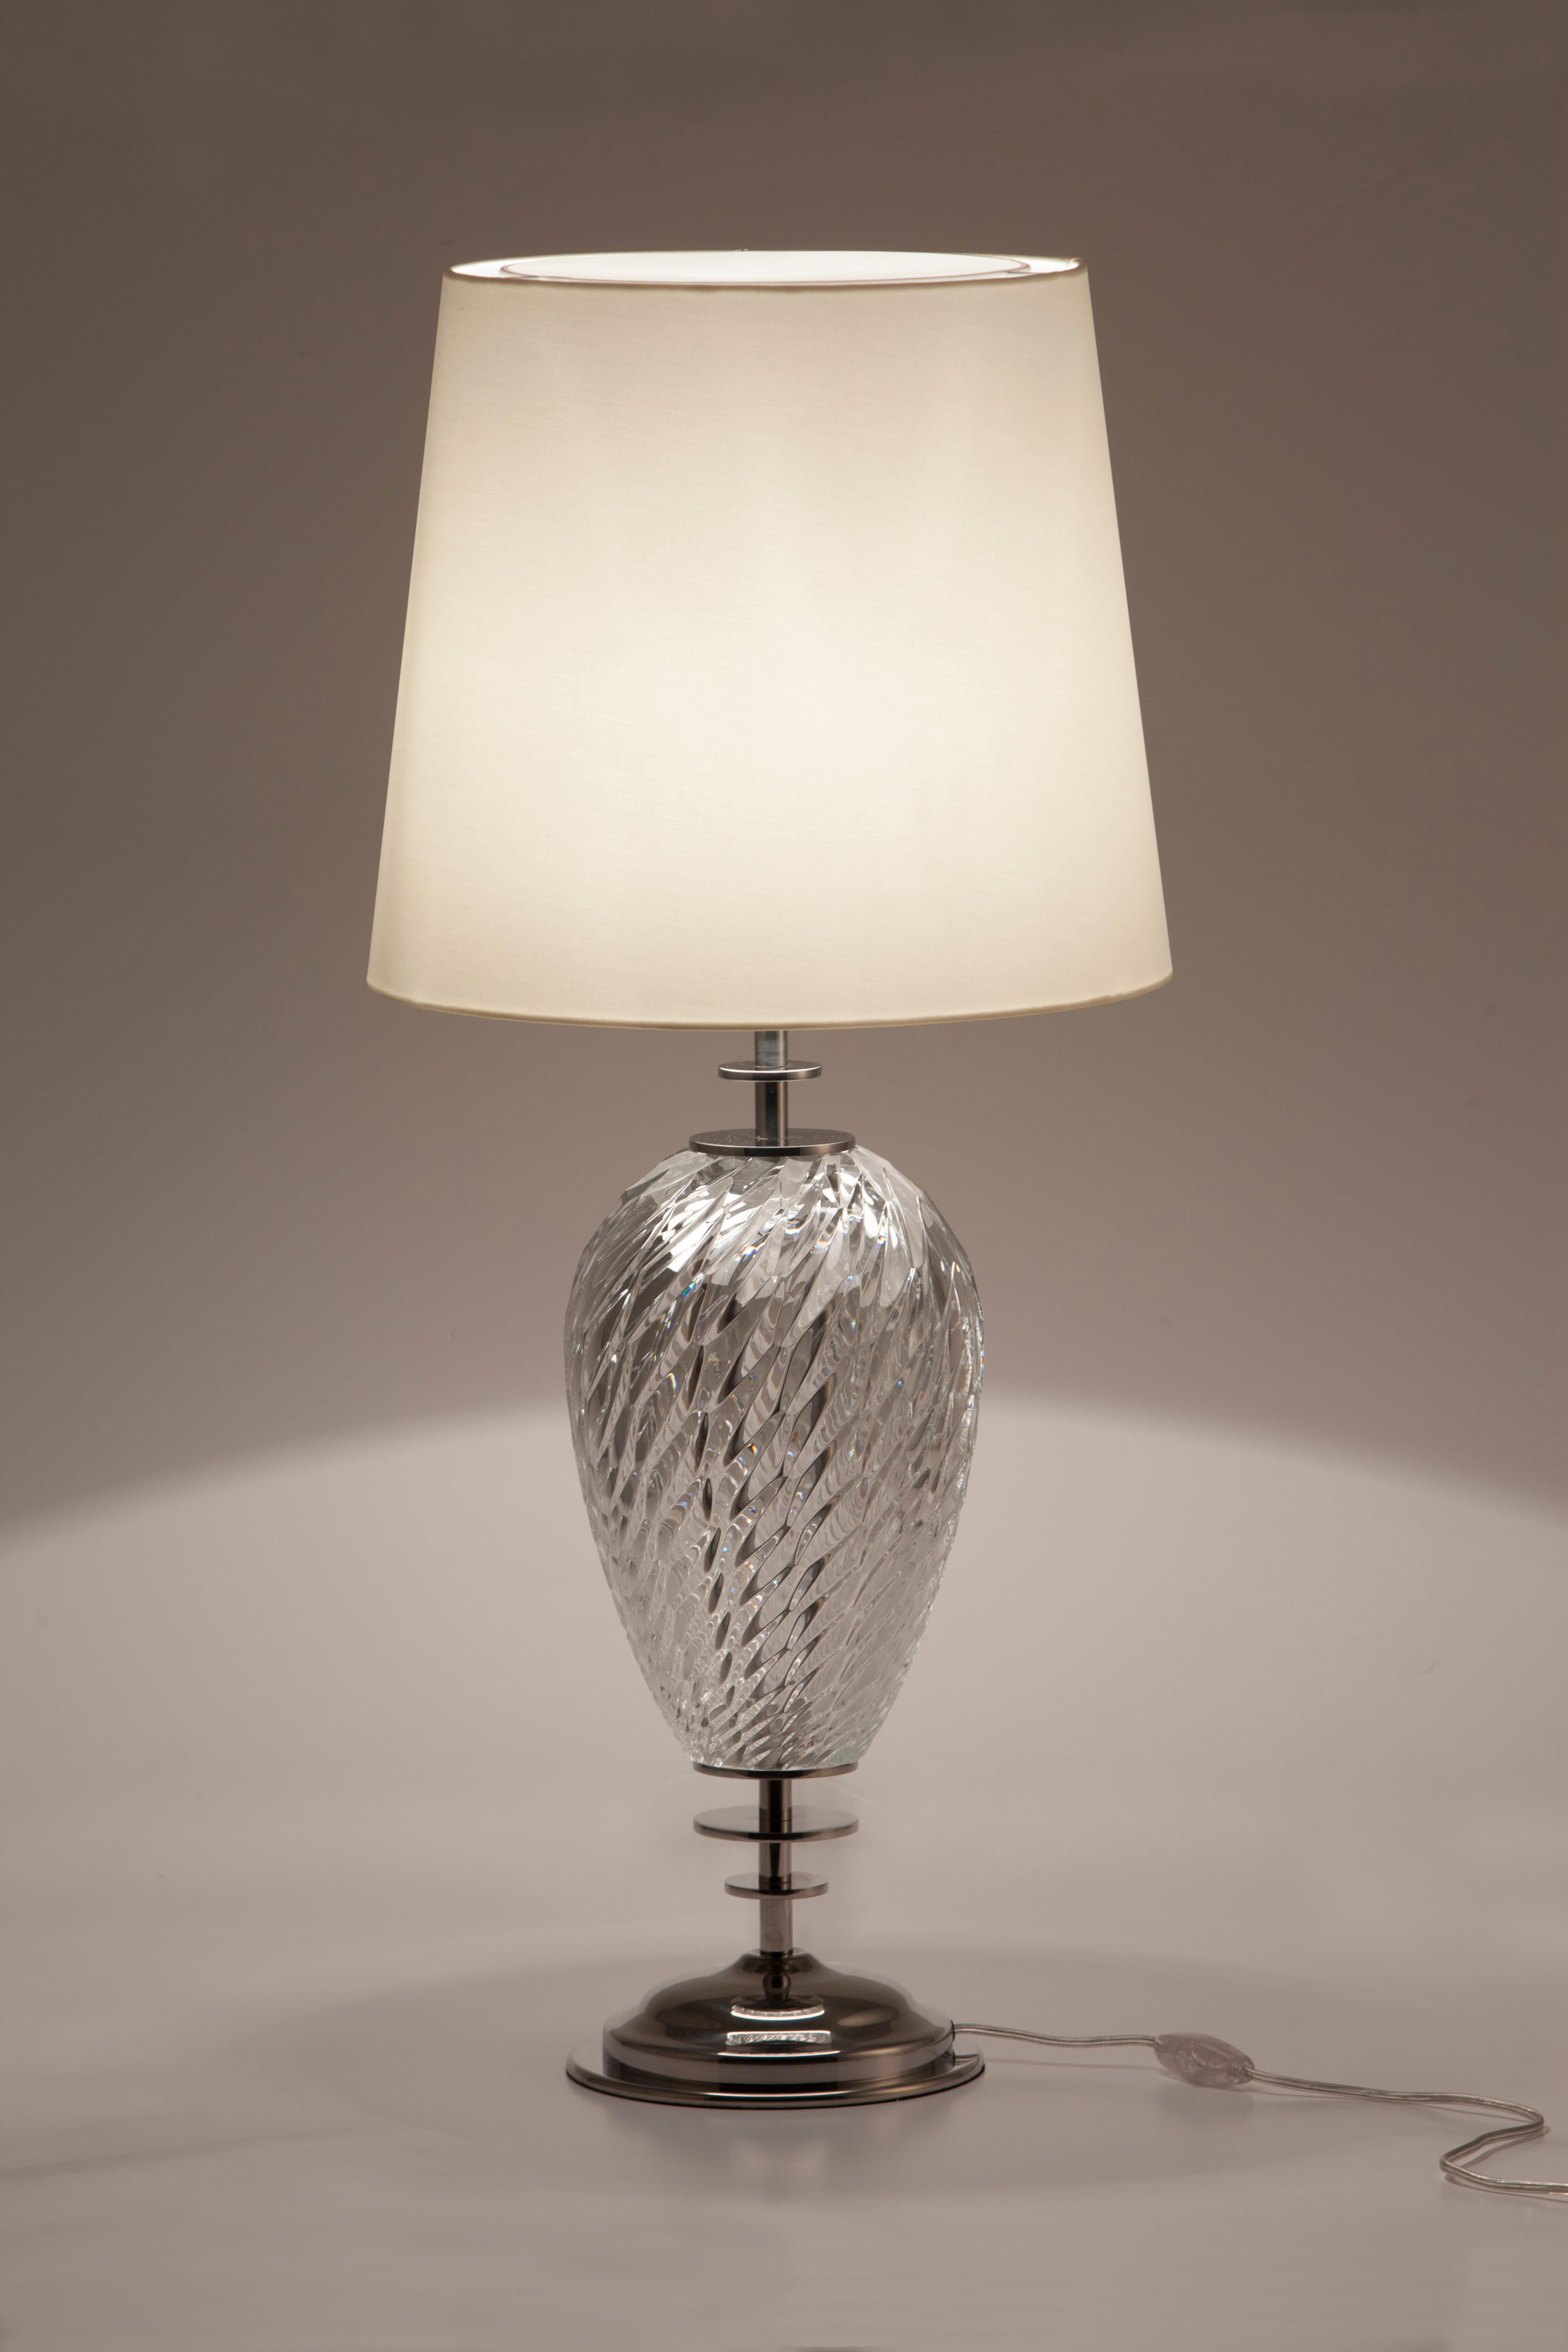 Contemporary Art Deco Vista Alegre Crystal Table Lamp Handmade in Portugal by Greenapple For Sale